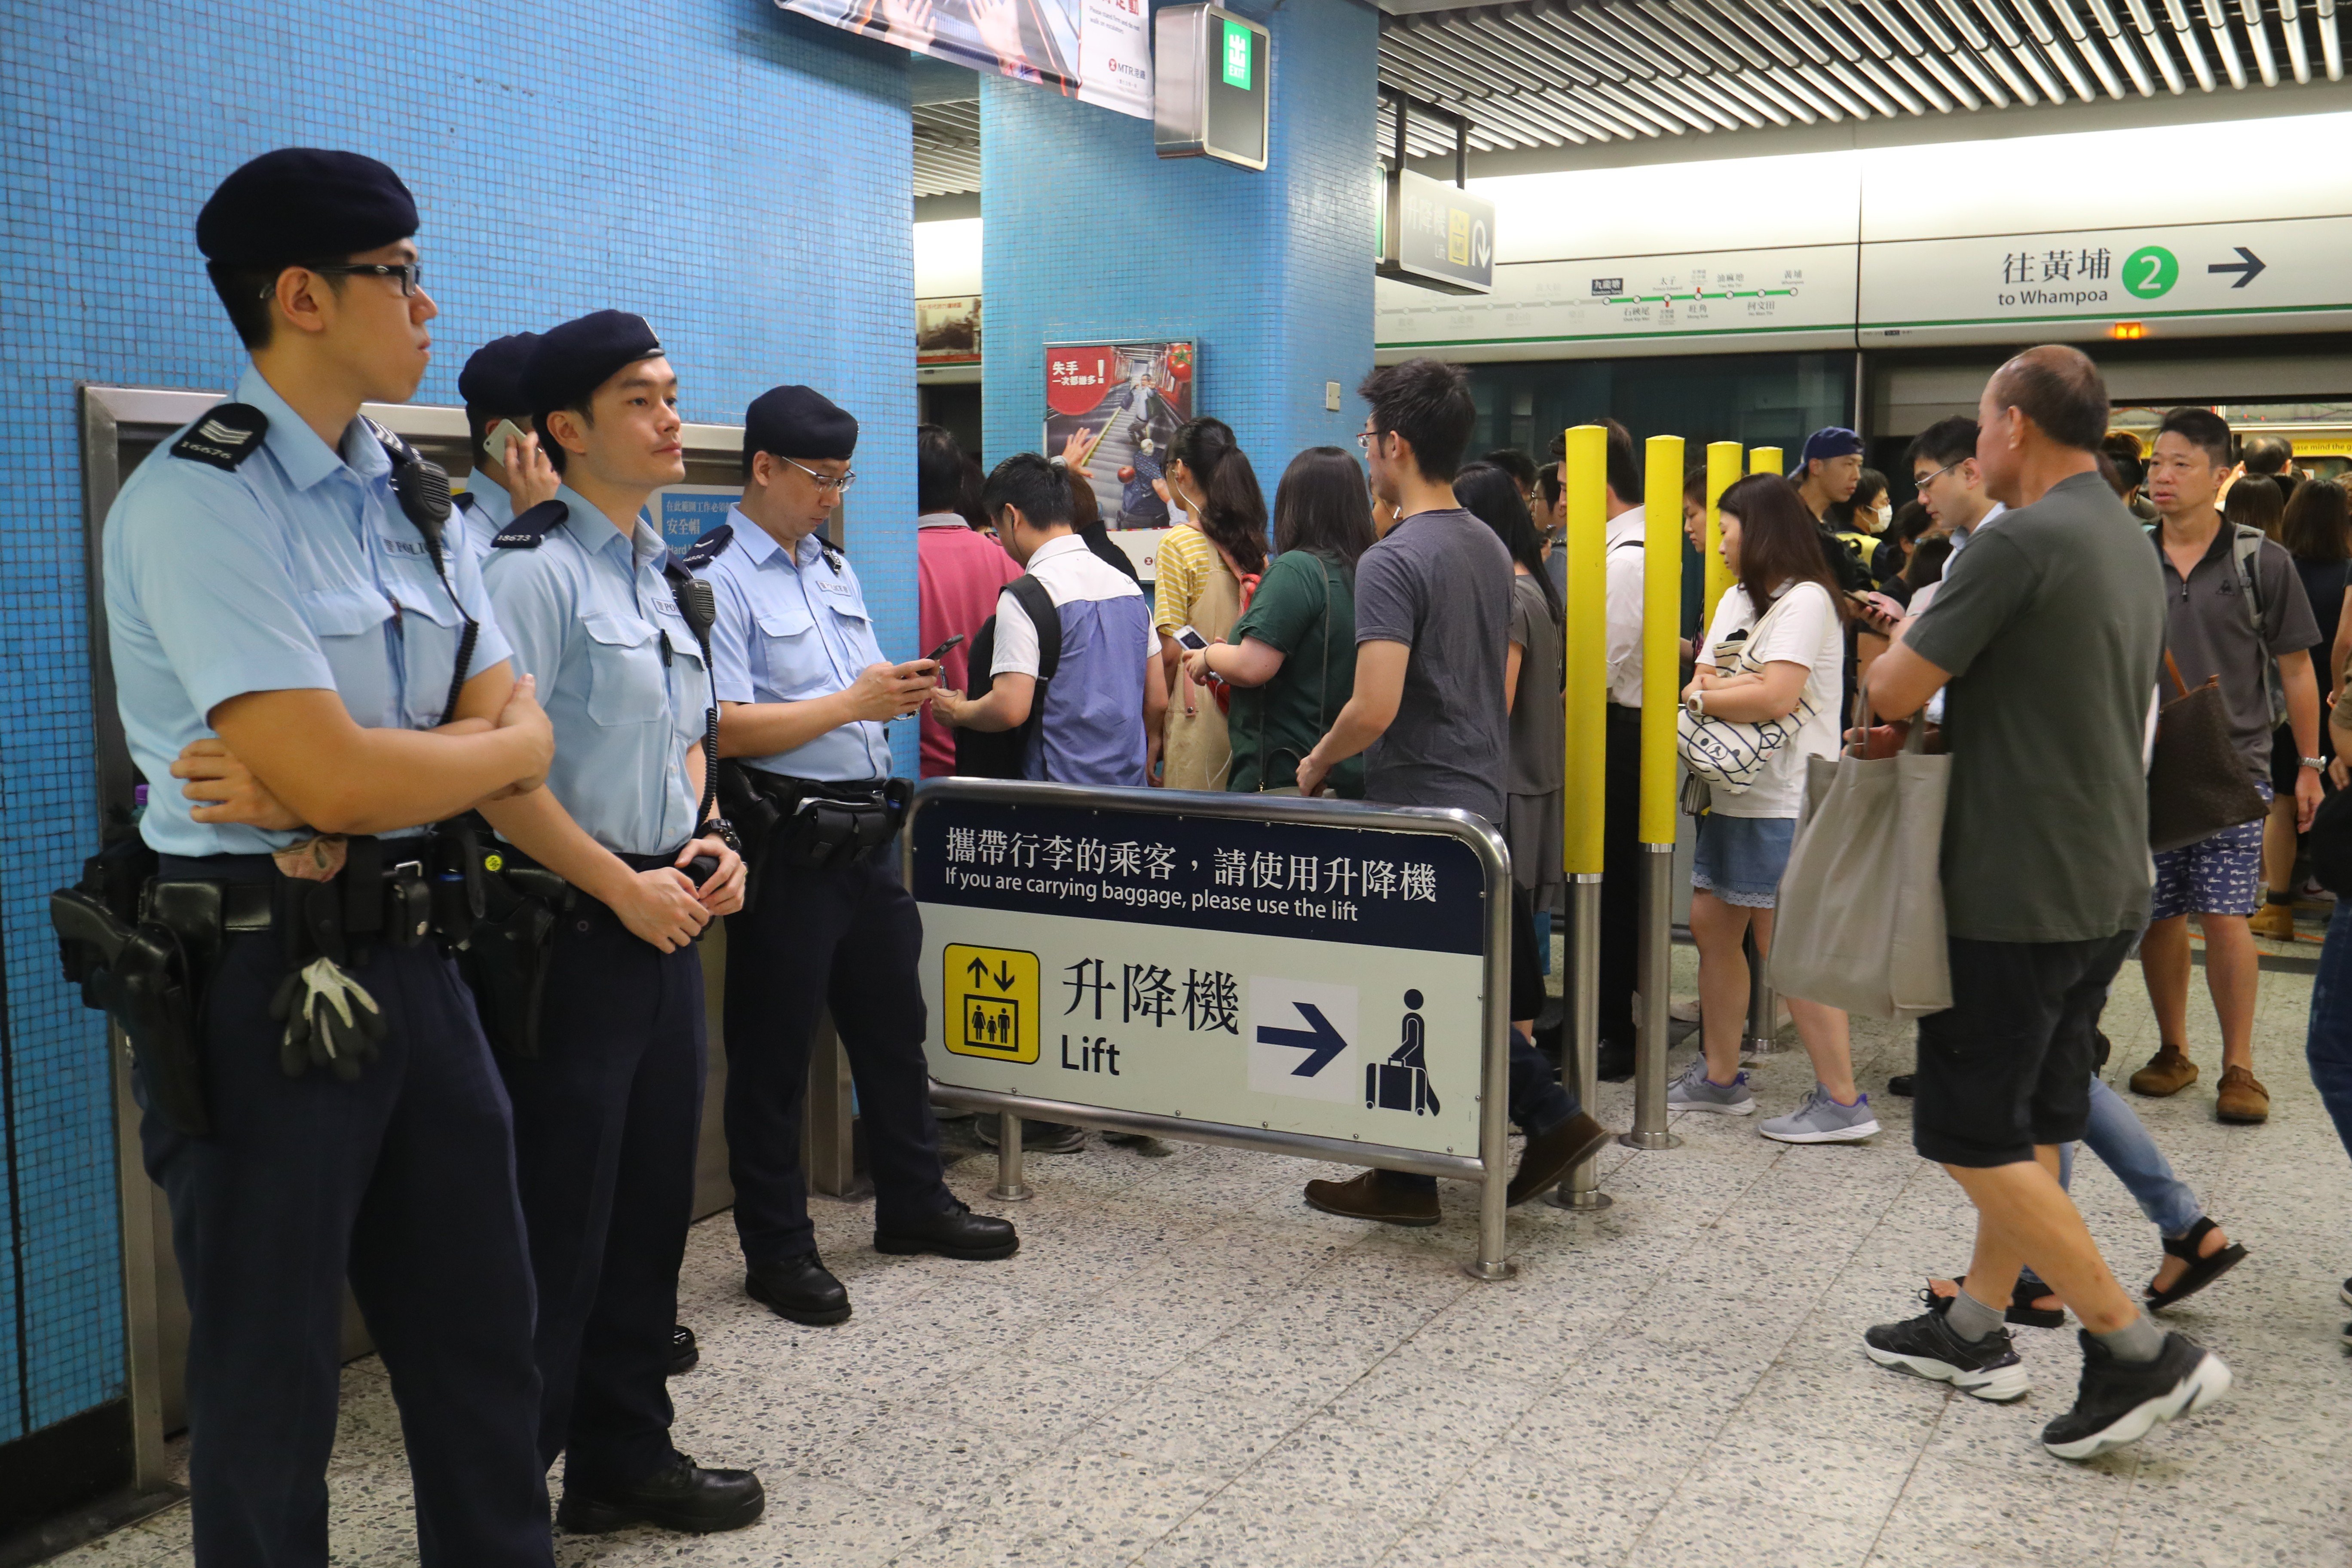 Police officers stand guard at Kowloon Tong station on Friday morning. Photo: Edmond So